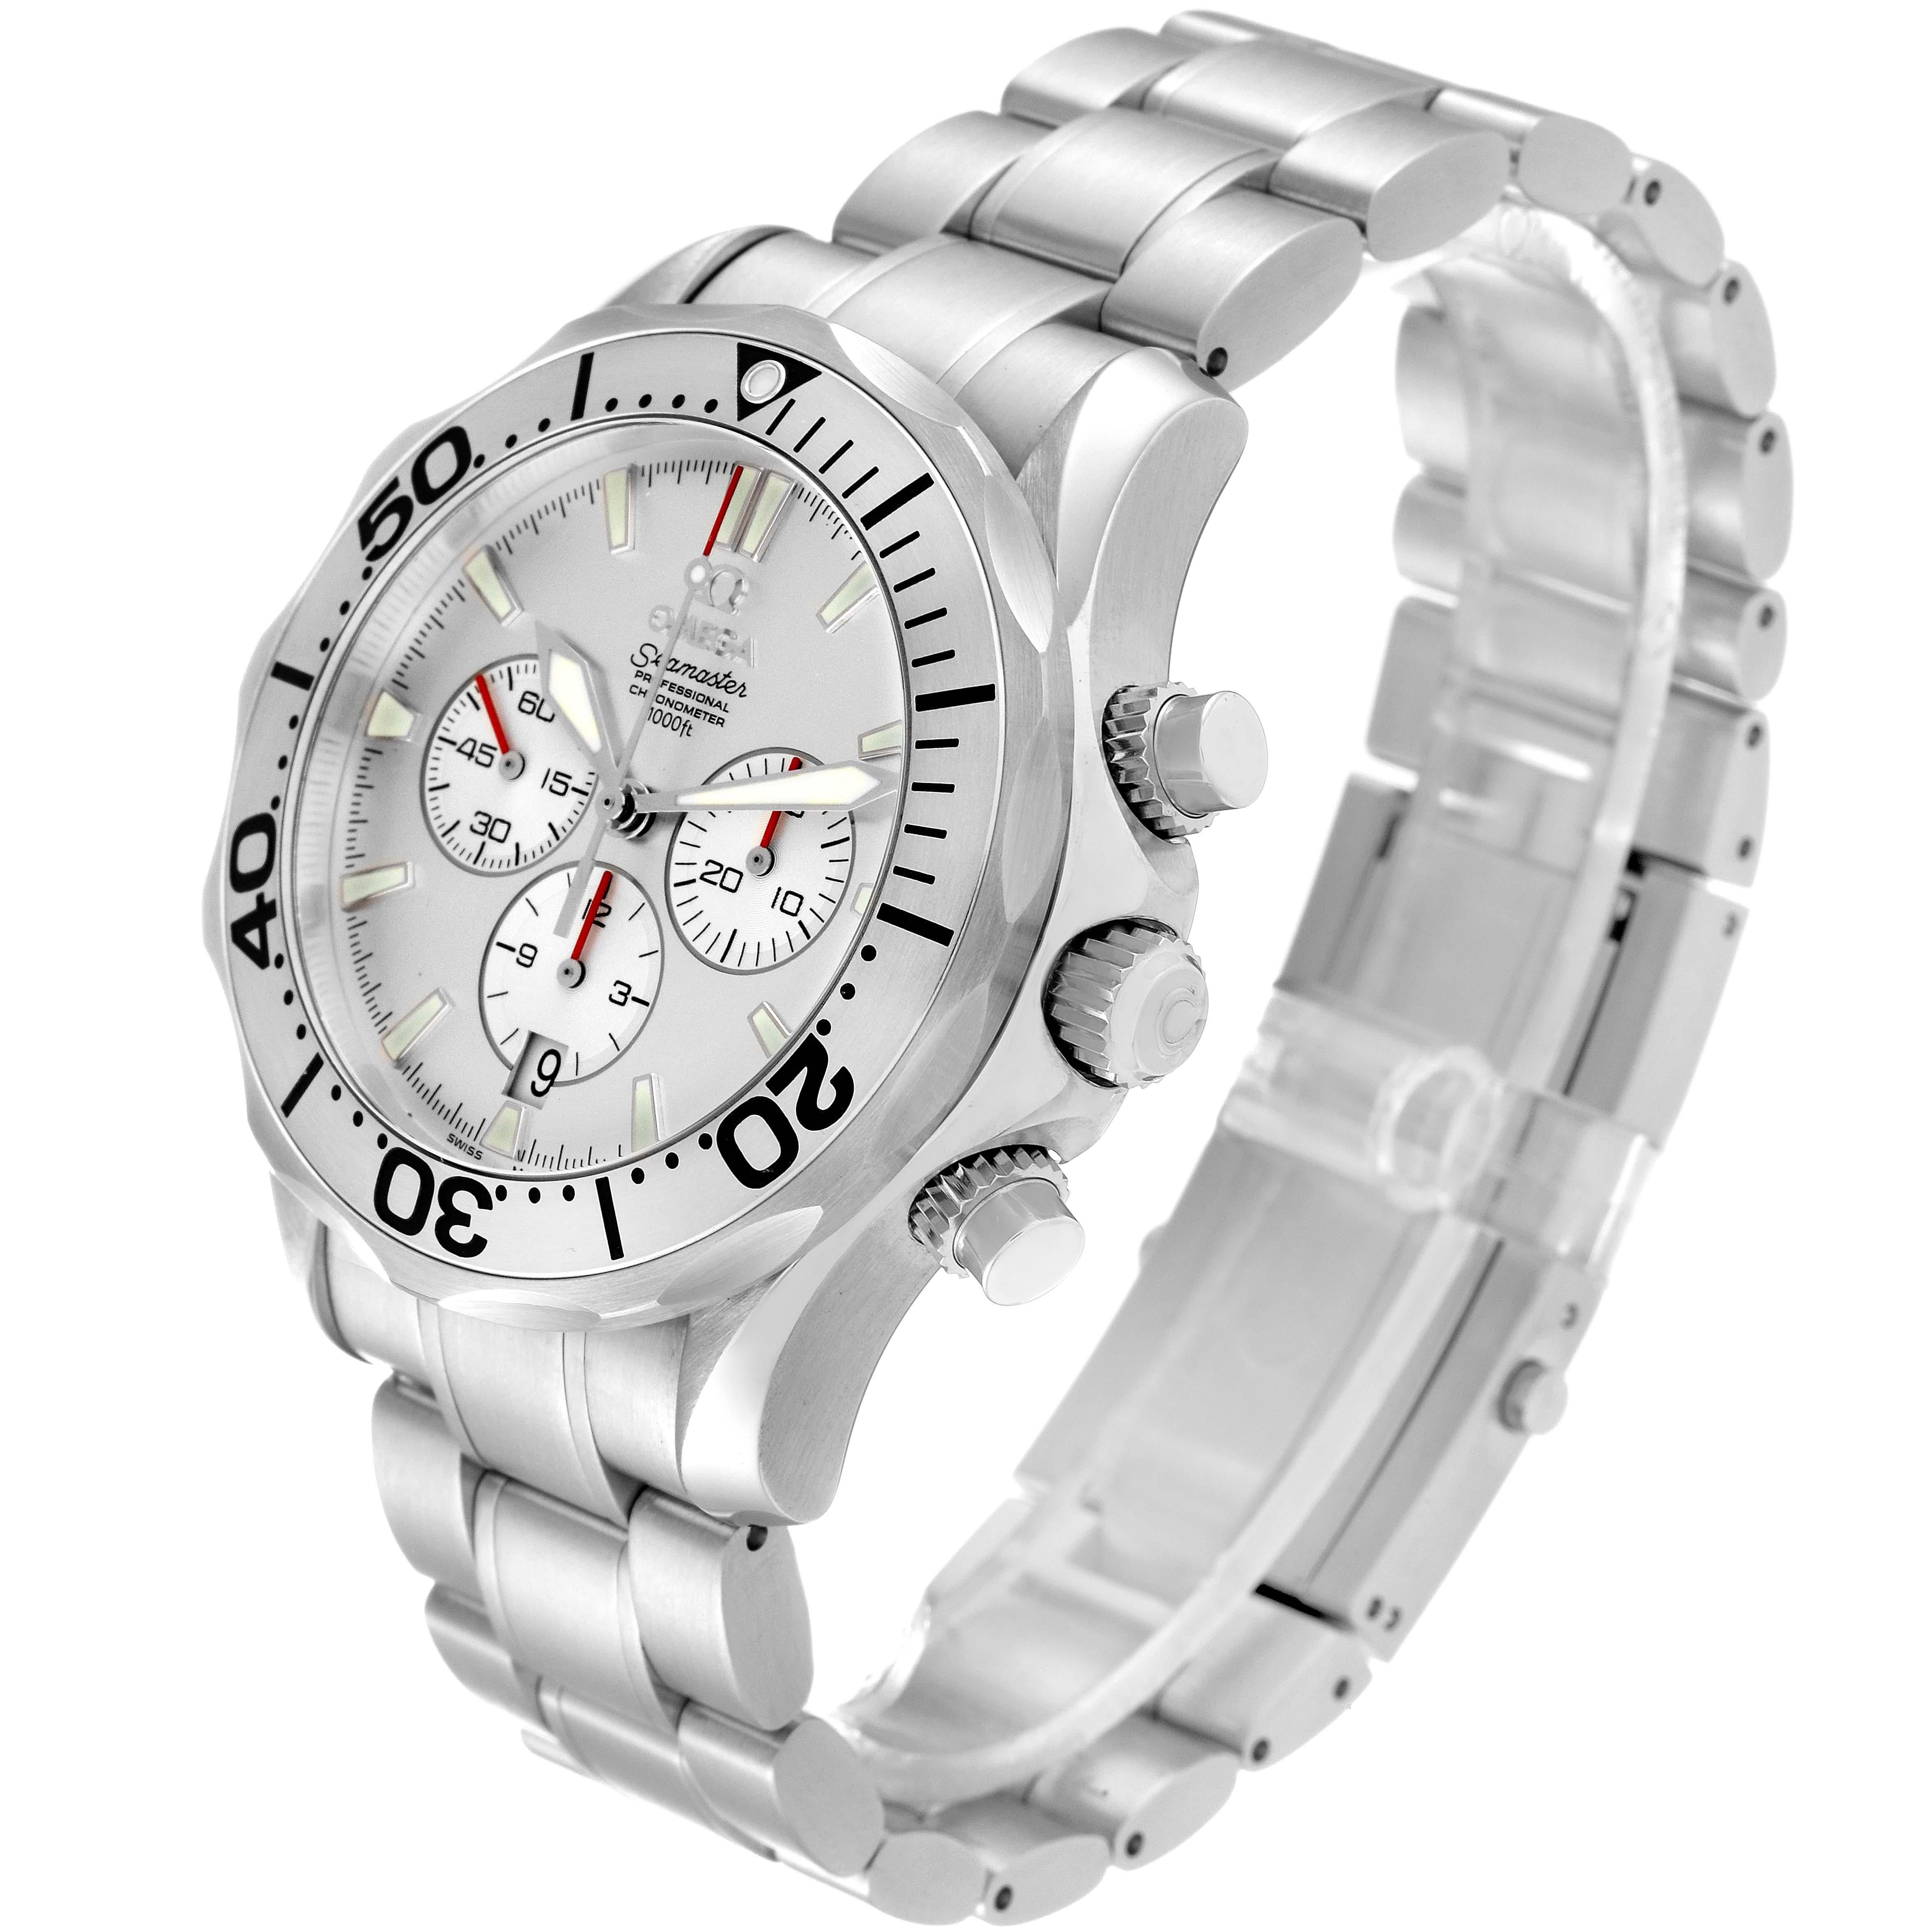 Men's Omega Seamaster Special Edition Chronograph Watch 2589.30.00 Box Card For Sale